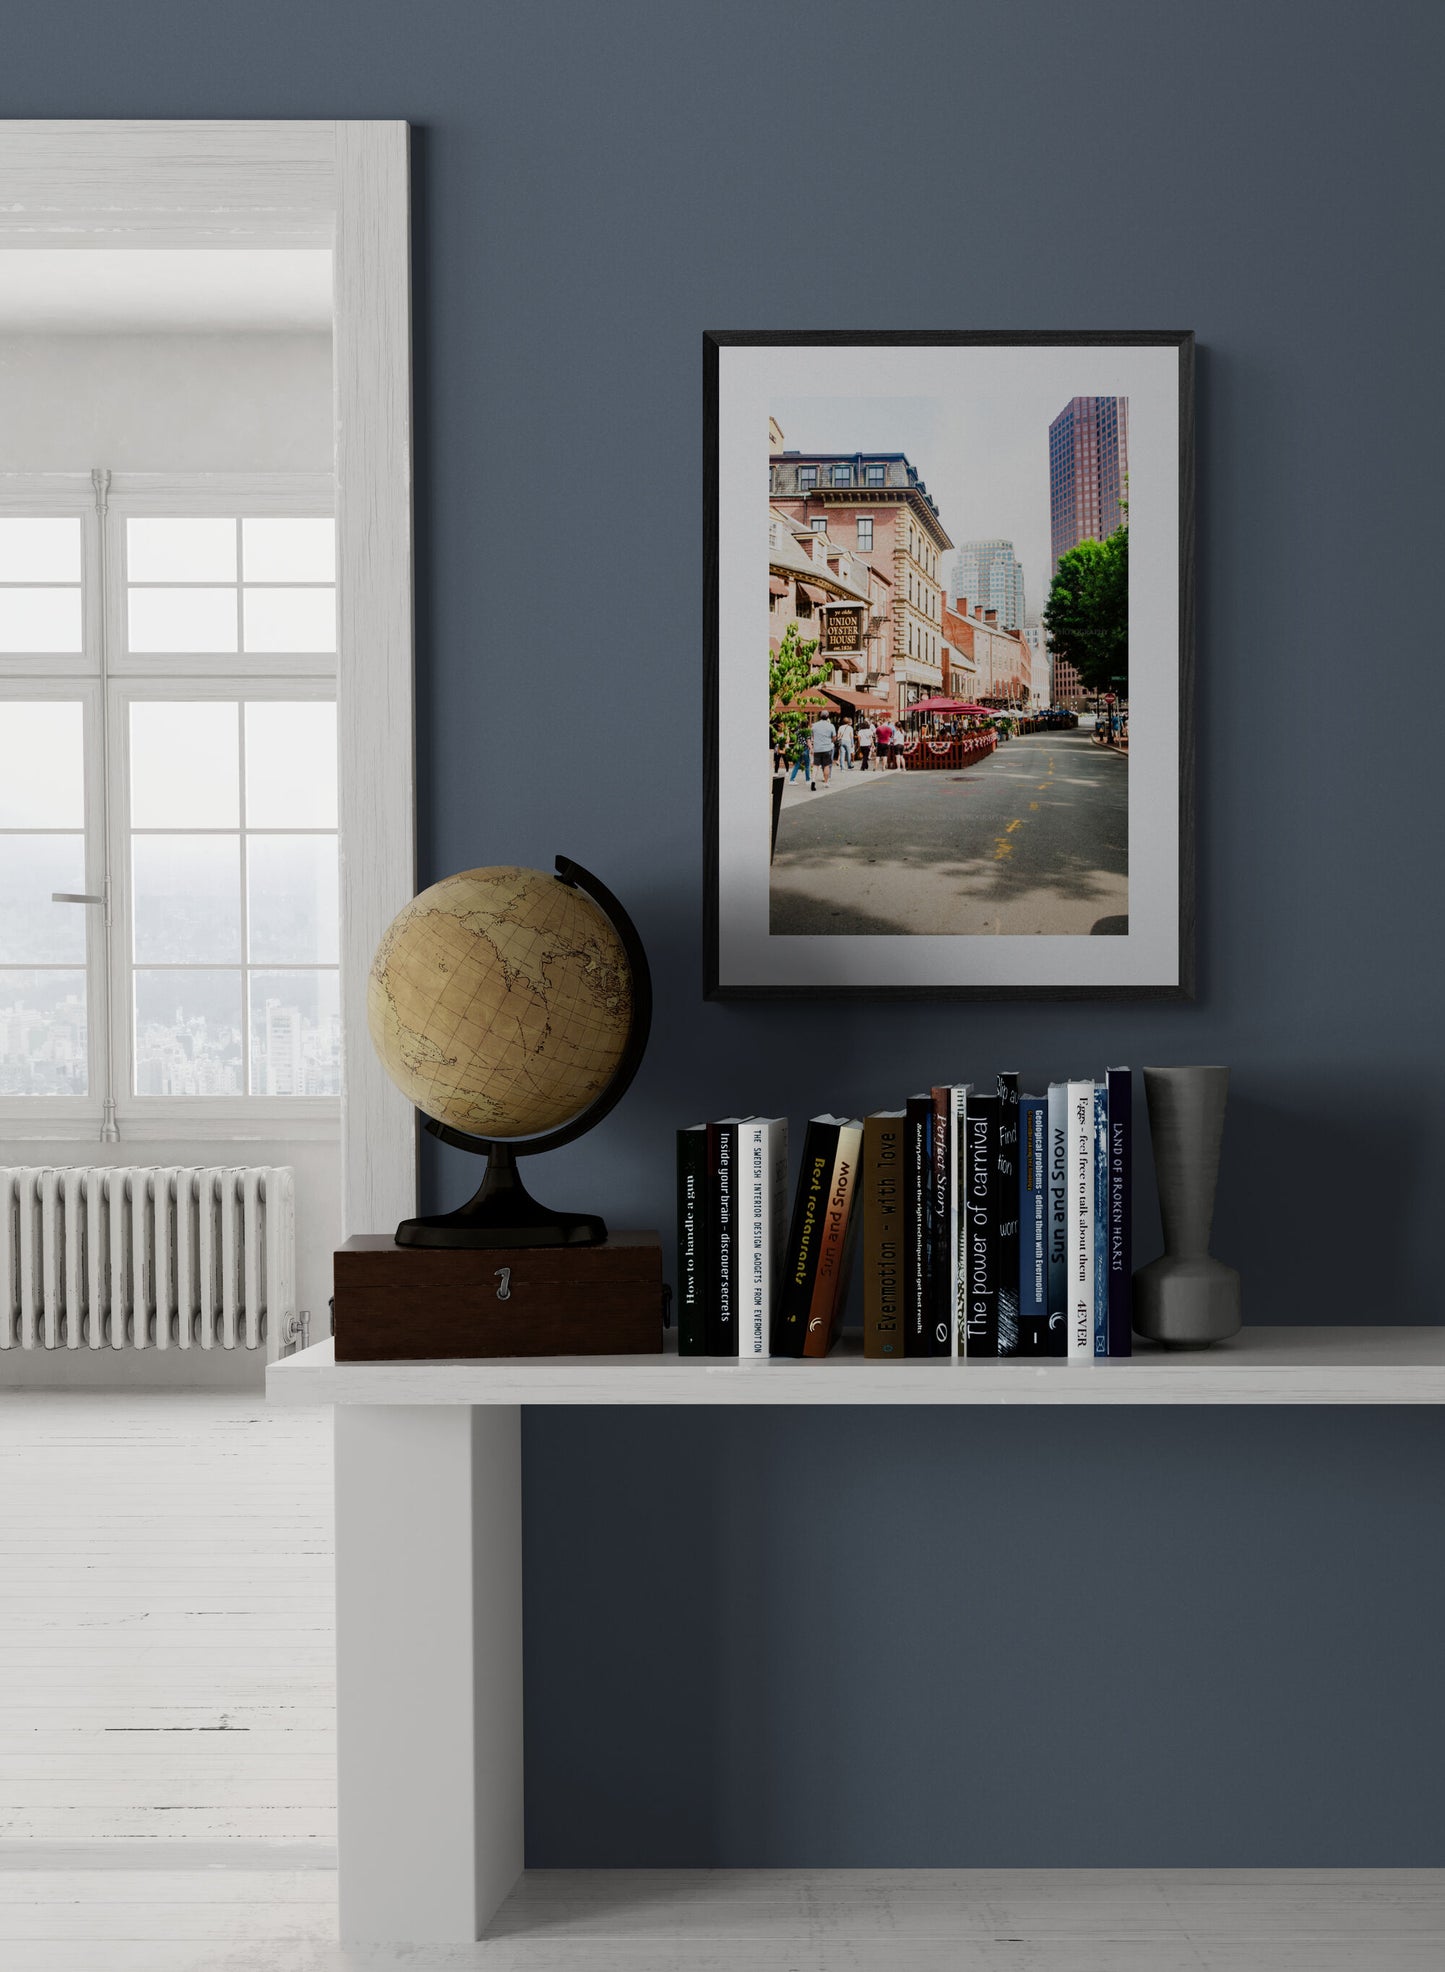 Photograph of Union Oyster House and Union Street in Boston MA in a home office